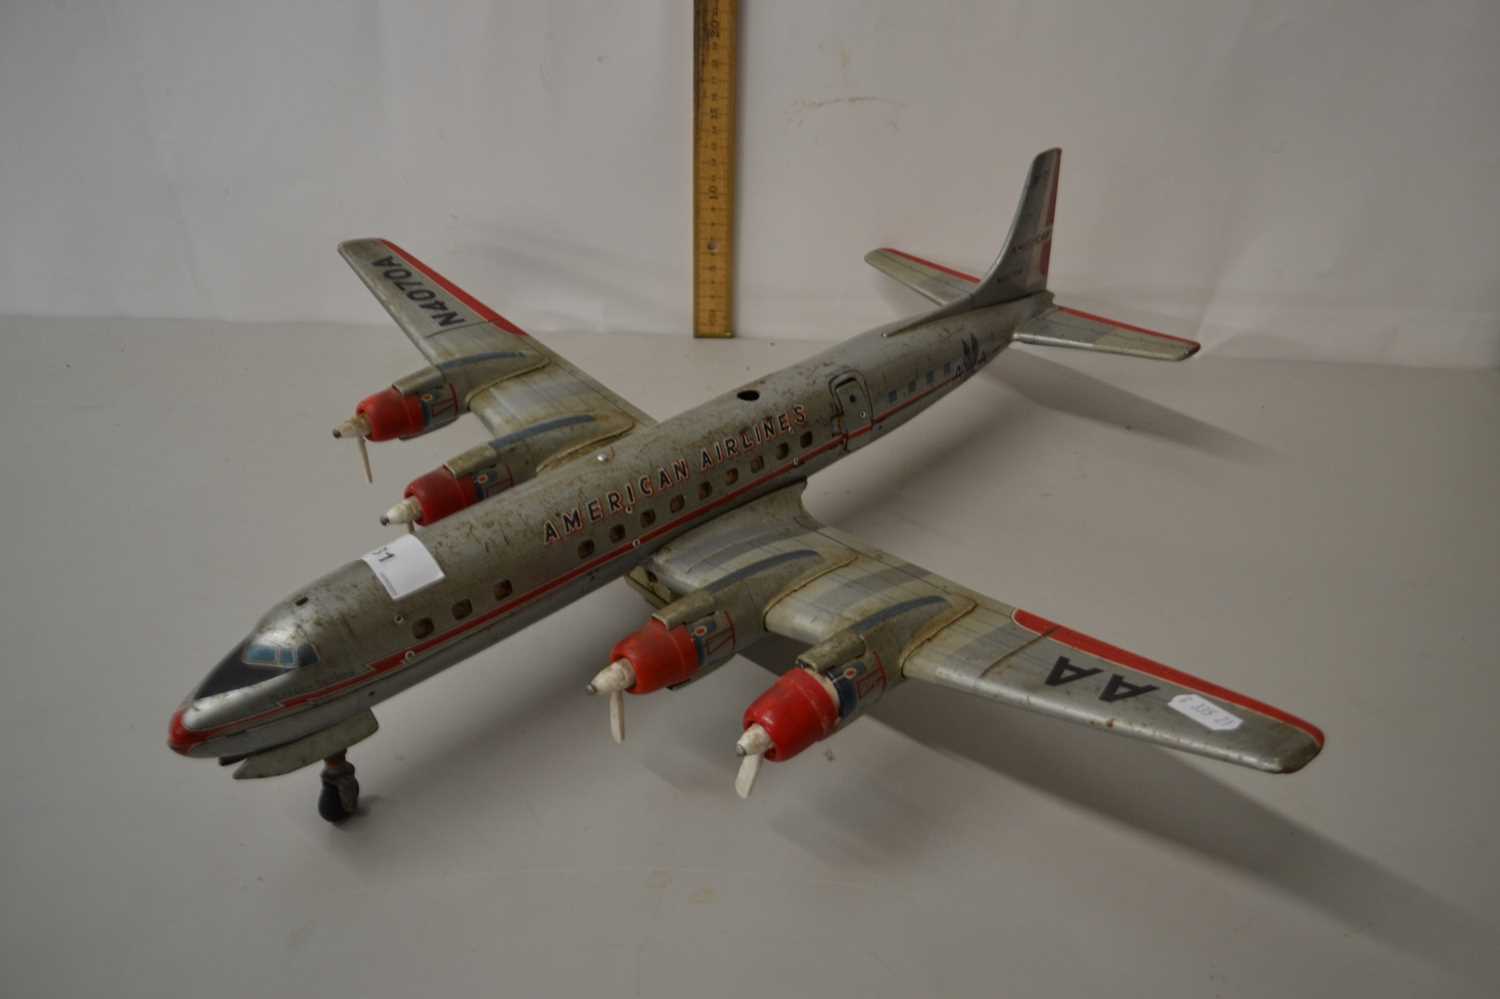 Japanese made model of an American Airlines jet No AA N4070A, fitted with a battery mechanism -